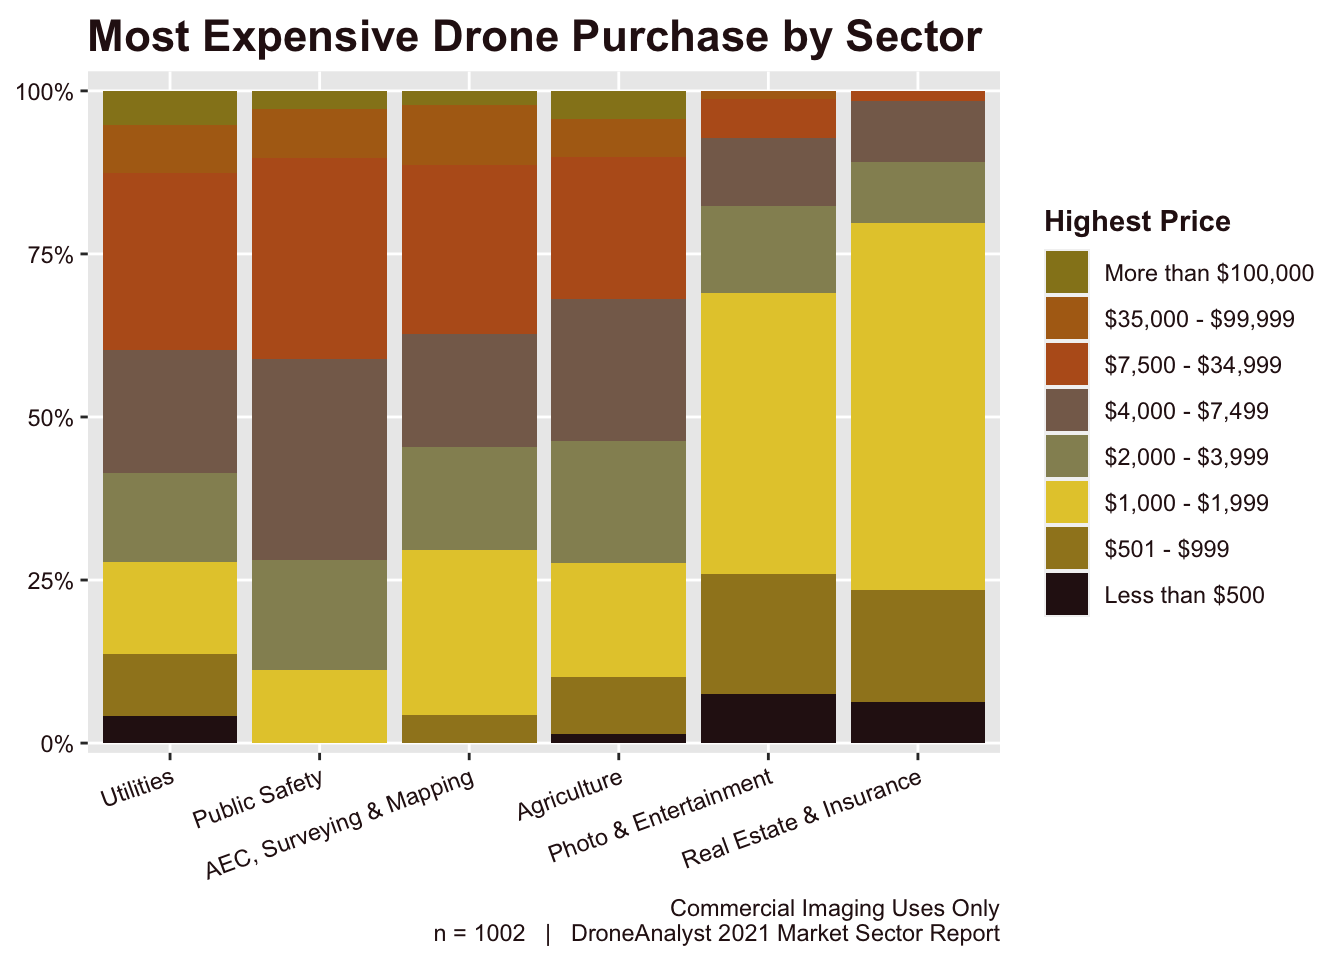 Most Expensive Drone Purchase by Sector